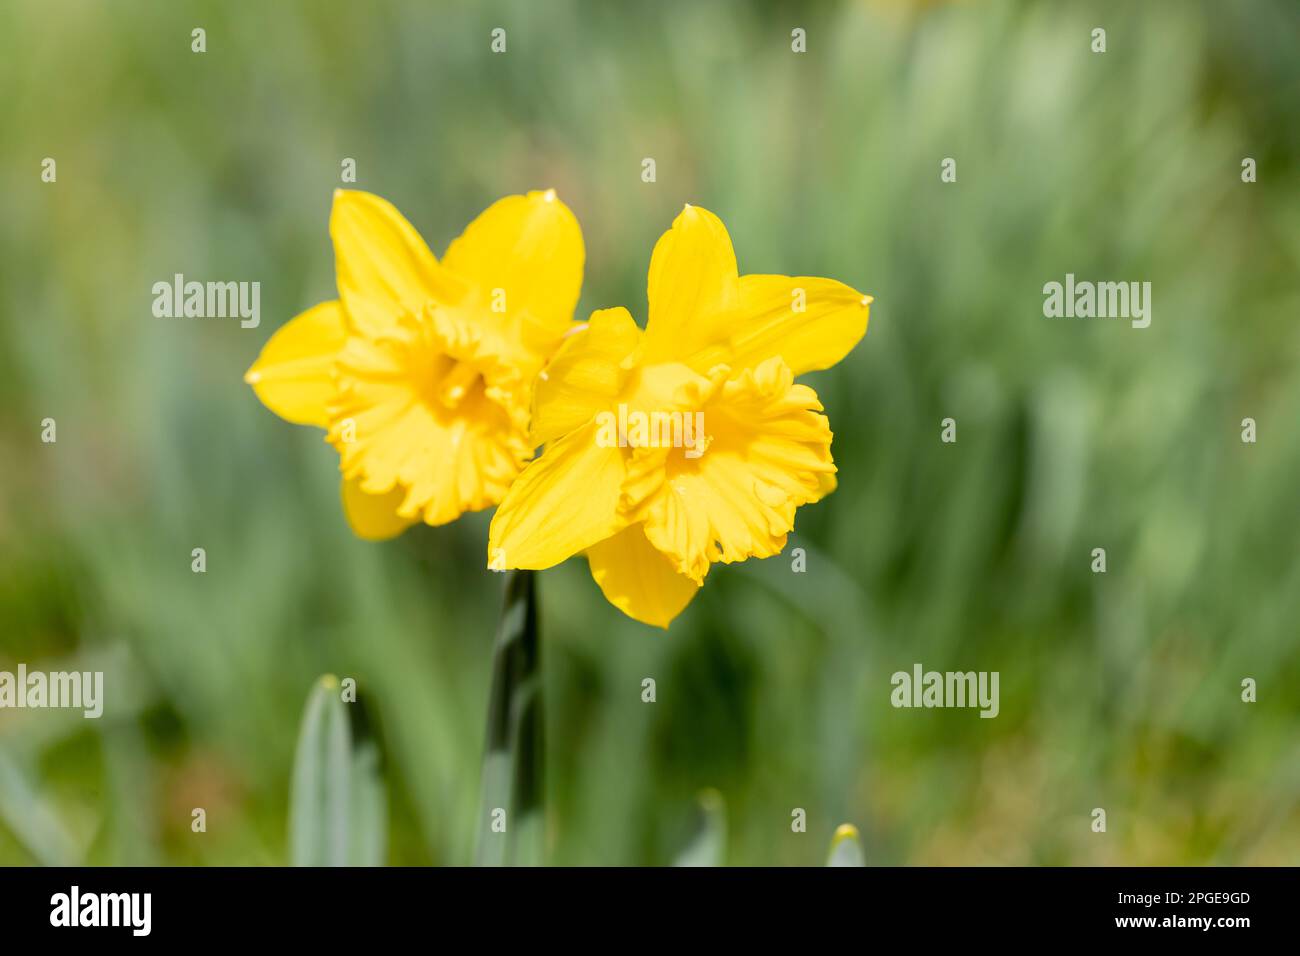 Two golden Daffodils, Narcissus in early springtime. England, UK Stock Photo